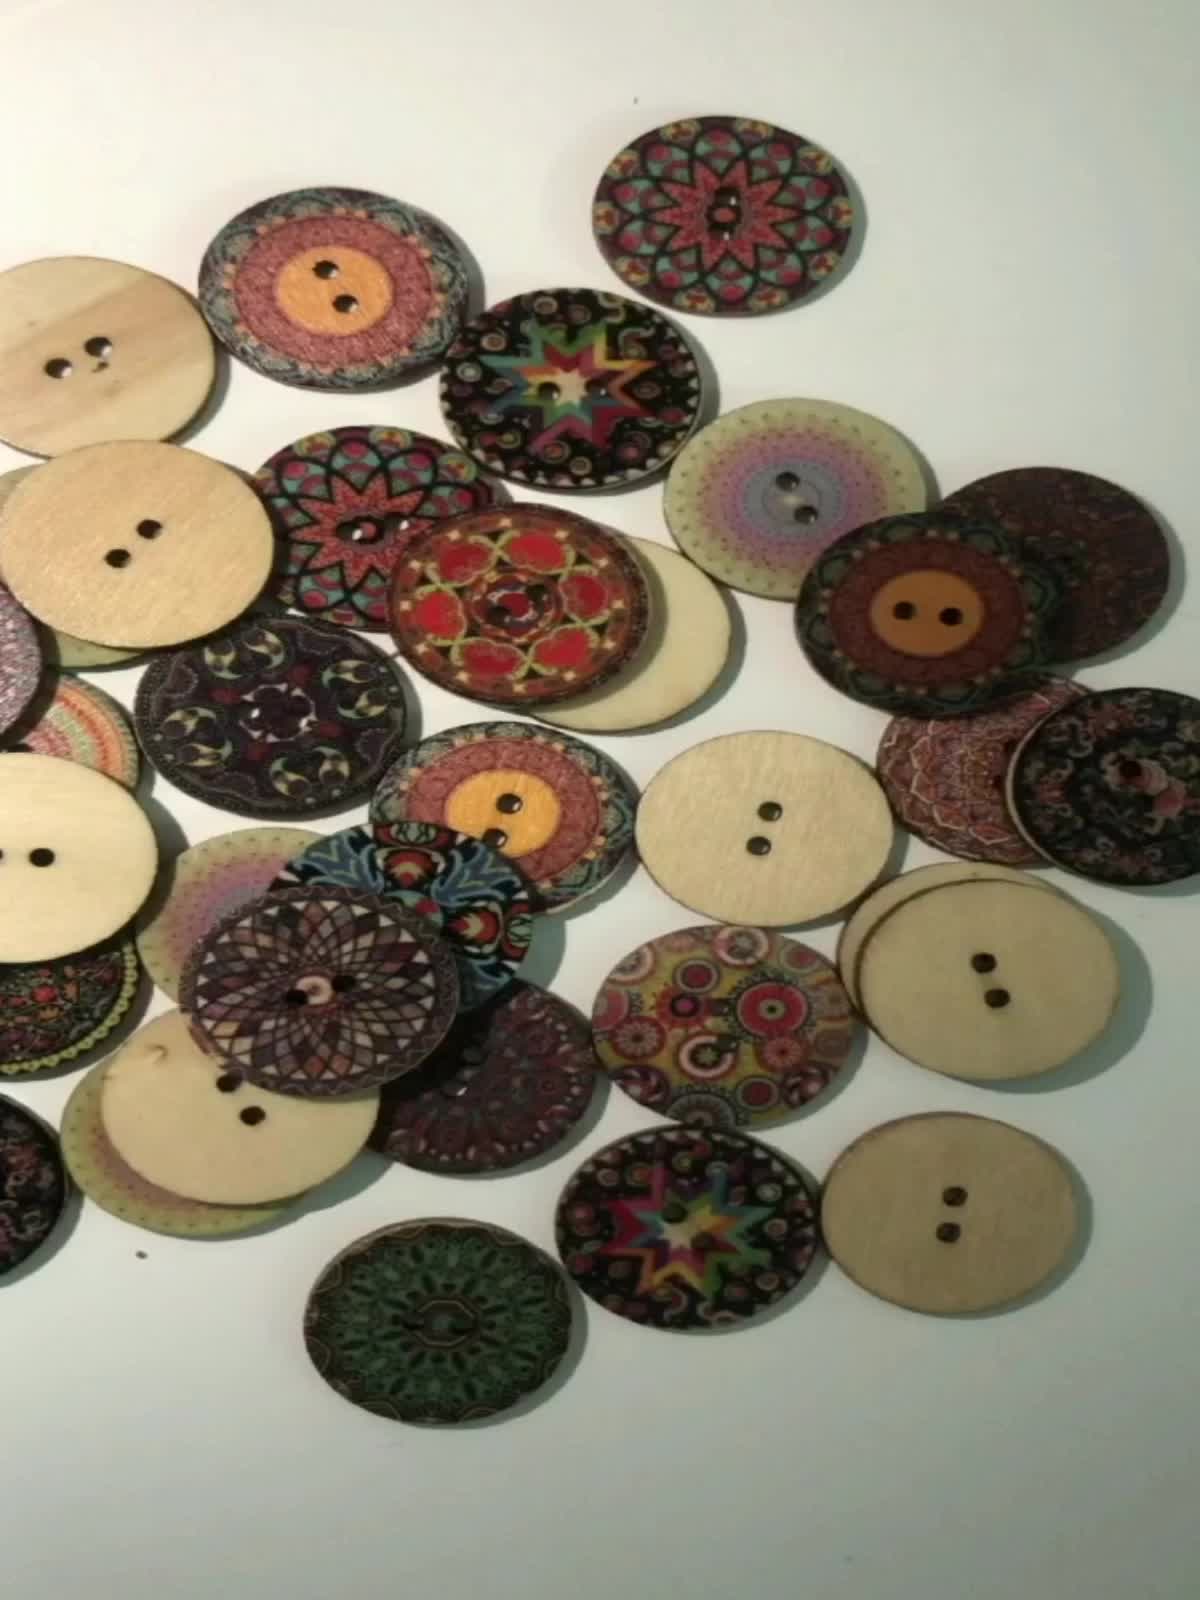  NUOMI 100Pcs Cute Wooden Craft Buttons 2 Holes